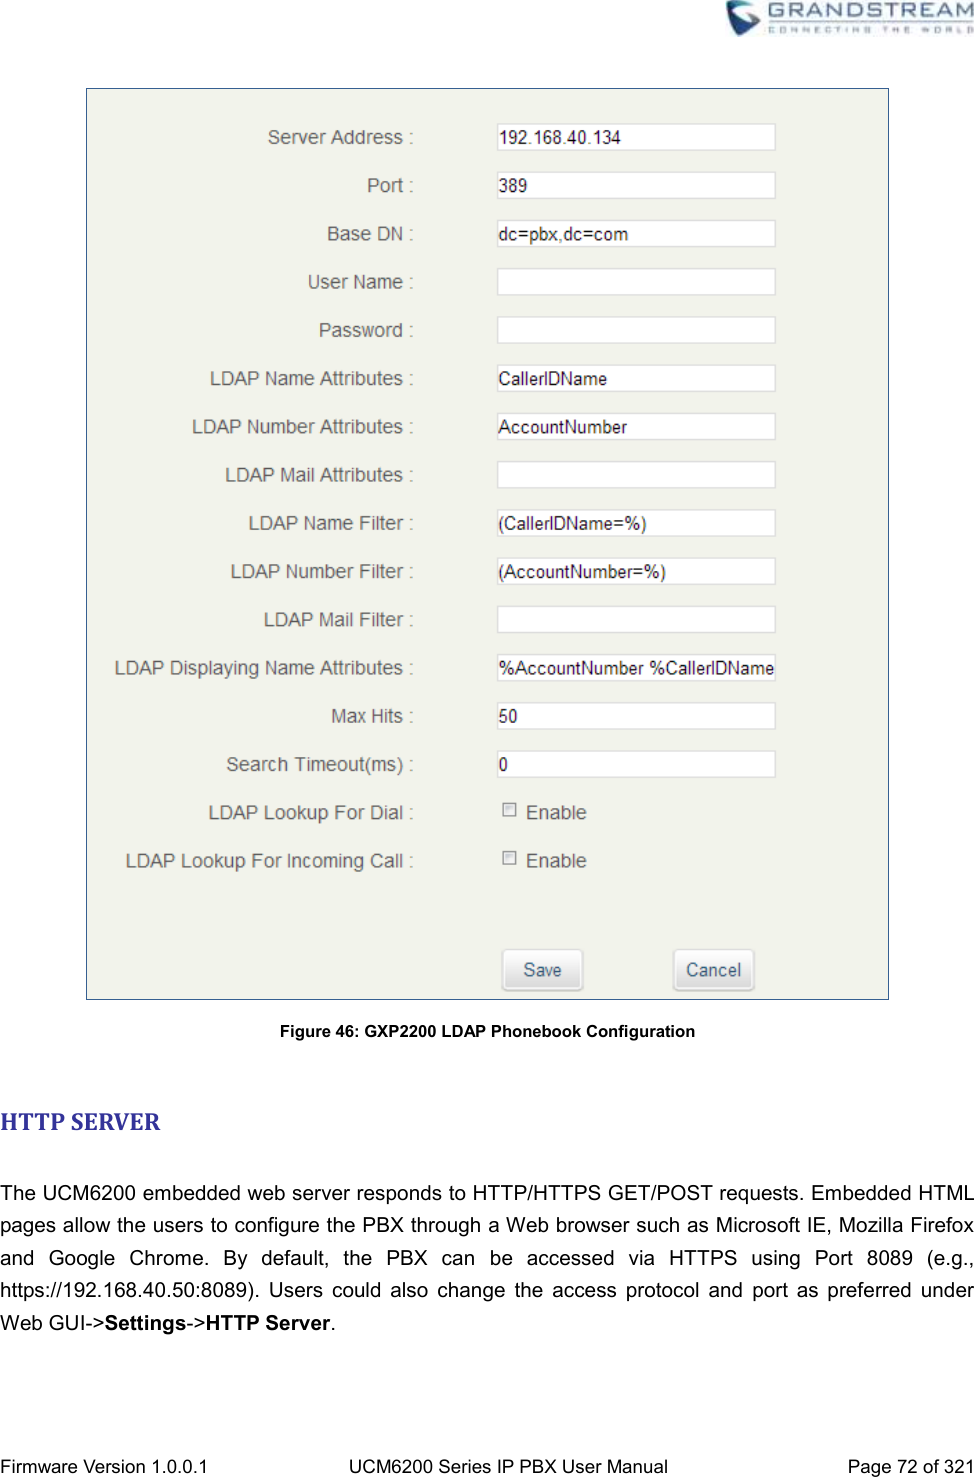  Firmware Version 1.0.0.1 UCM6200 Series IP PBX User Manual Page 72 of 321     Figure 46: GXP2200 LDAP Phonebook Configuration  HTTP SERVER  The UCM6200 embedded web server responds to HTTP/HTTPS GET/POST requests. Embedded HTML pages allow the users to configure the PBX through a Web browser such as Microsoft IE, Mozilla Firefox and  Google  Chrome.  By  default,  the  PBX  can  be  accessed  via  HTTPS  using  Port  8089  (e.g., https://192.168.40.50:8089).  Users  could  also  change  the  access  protocol  and  port  as  preferred  under Web GUI-&gt;Settings-&gt;HTTP Server.   